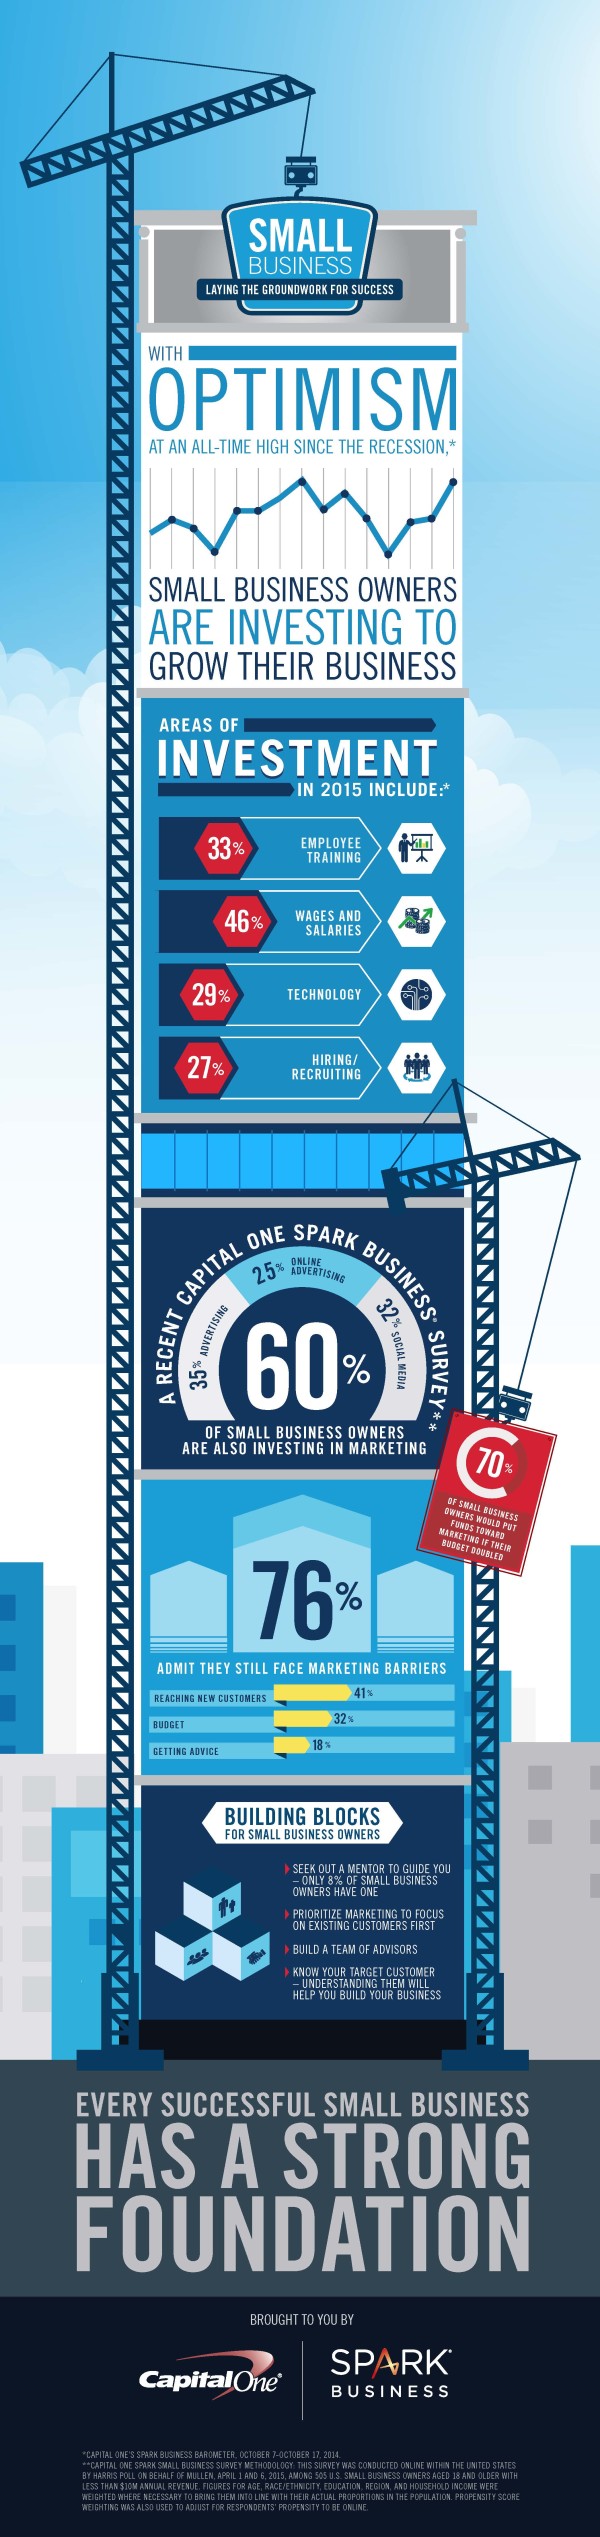 Capital One Small Business Infographic